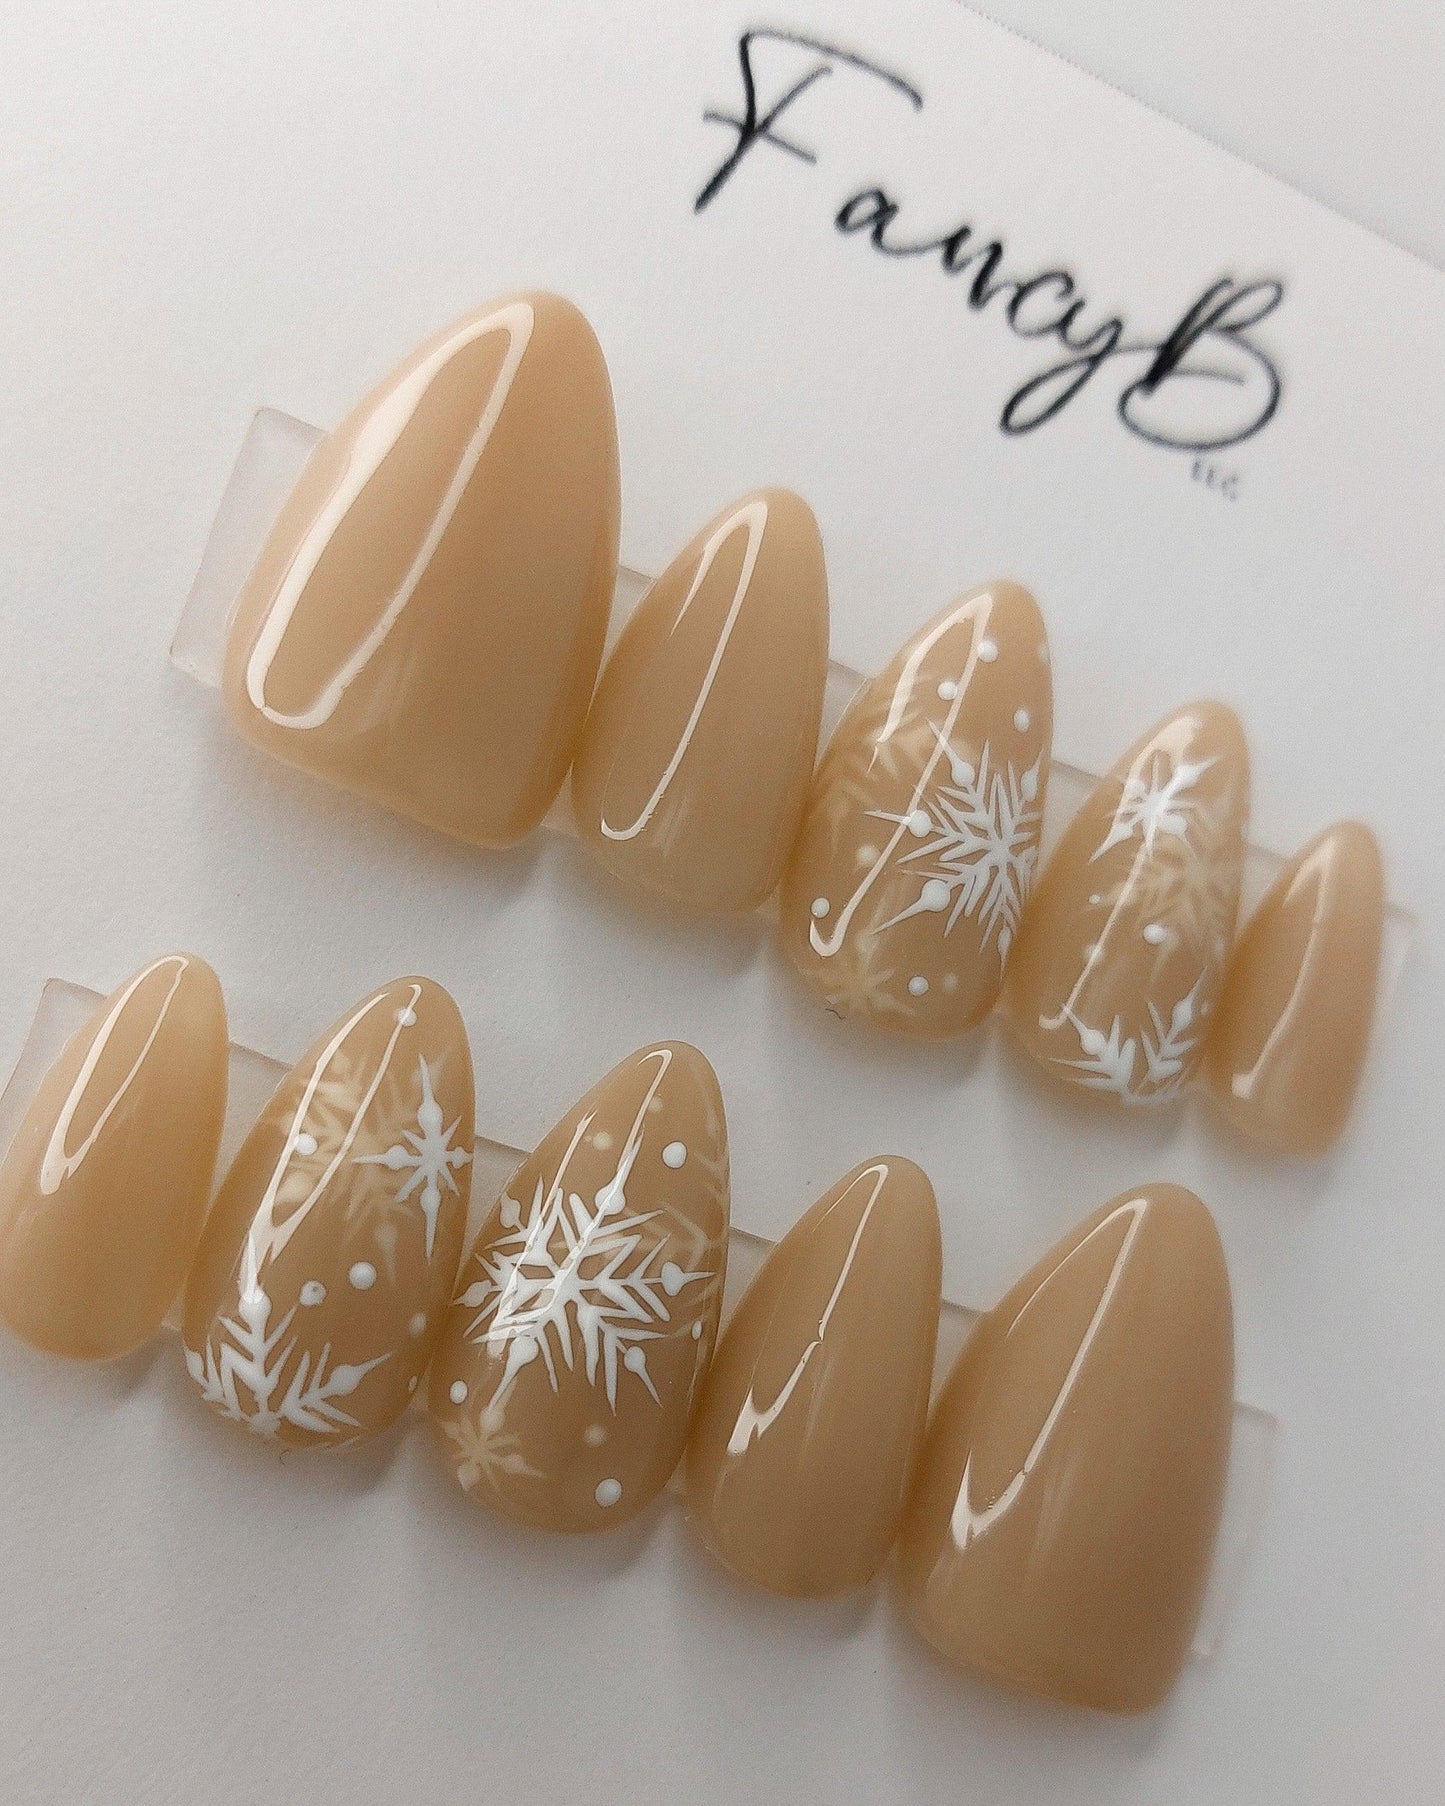 Cashmere Frost | Nude Jelly Press on Nails with Semi-transparent Layers of Snowflakes - FancyB Press-on Nails